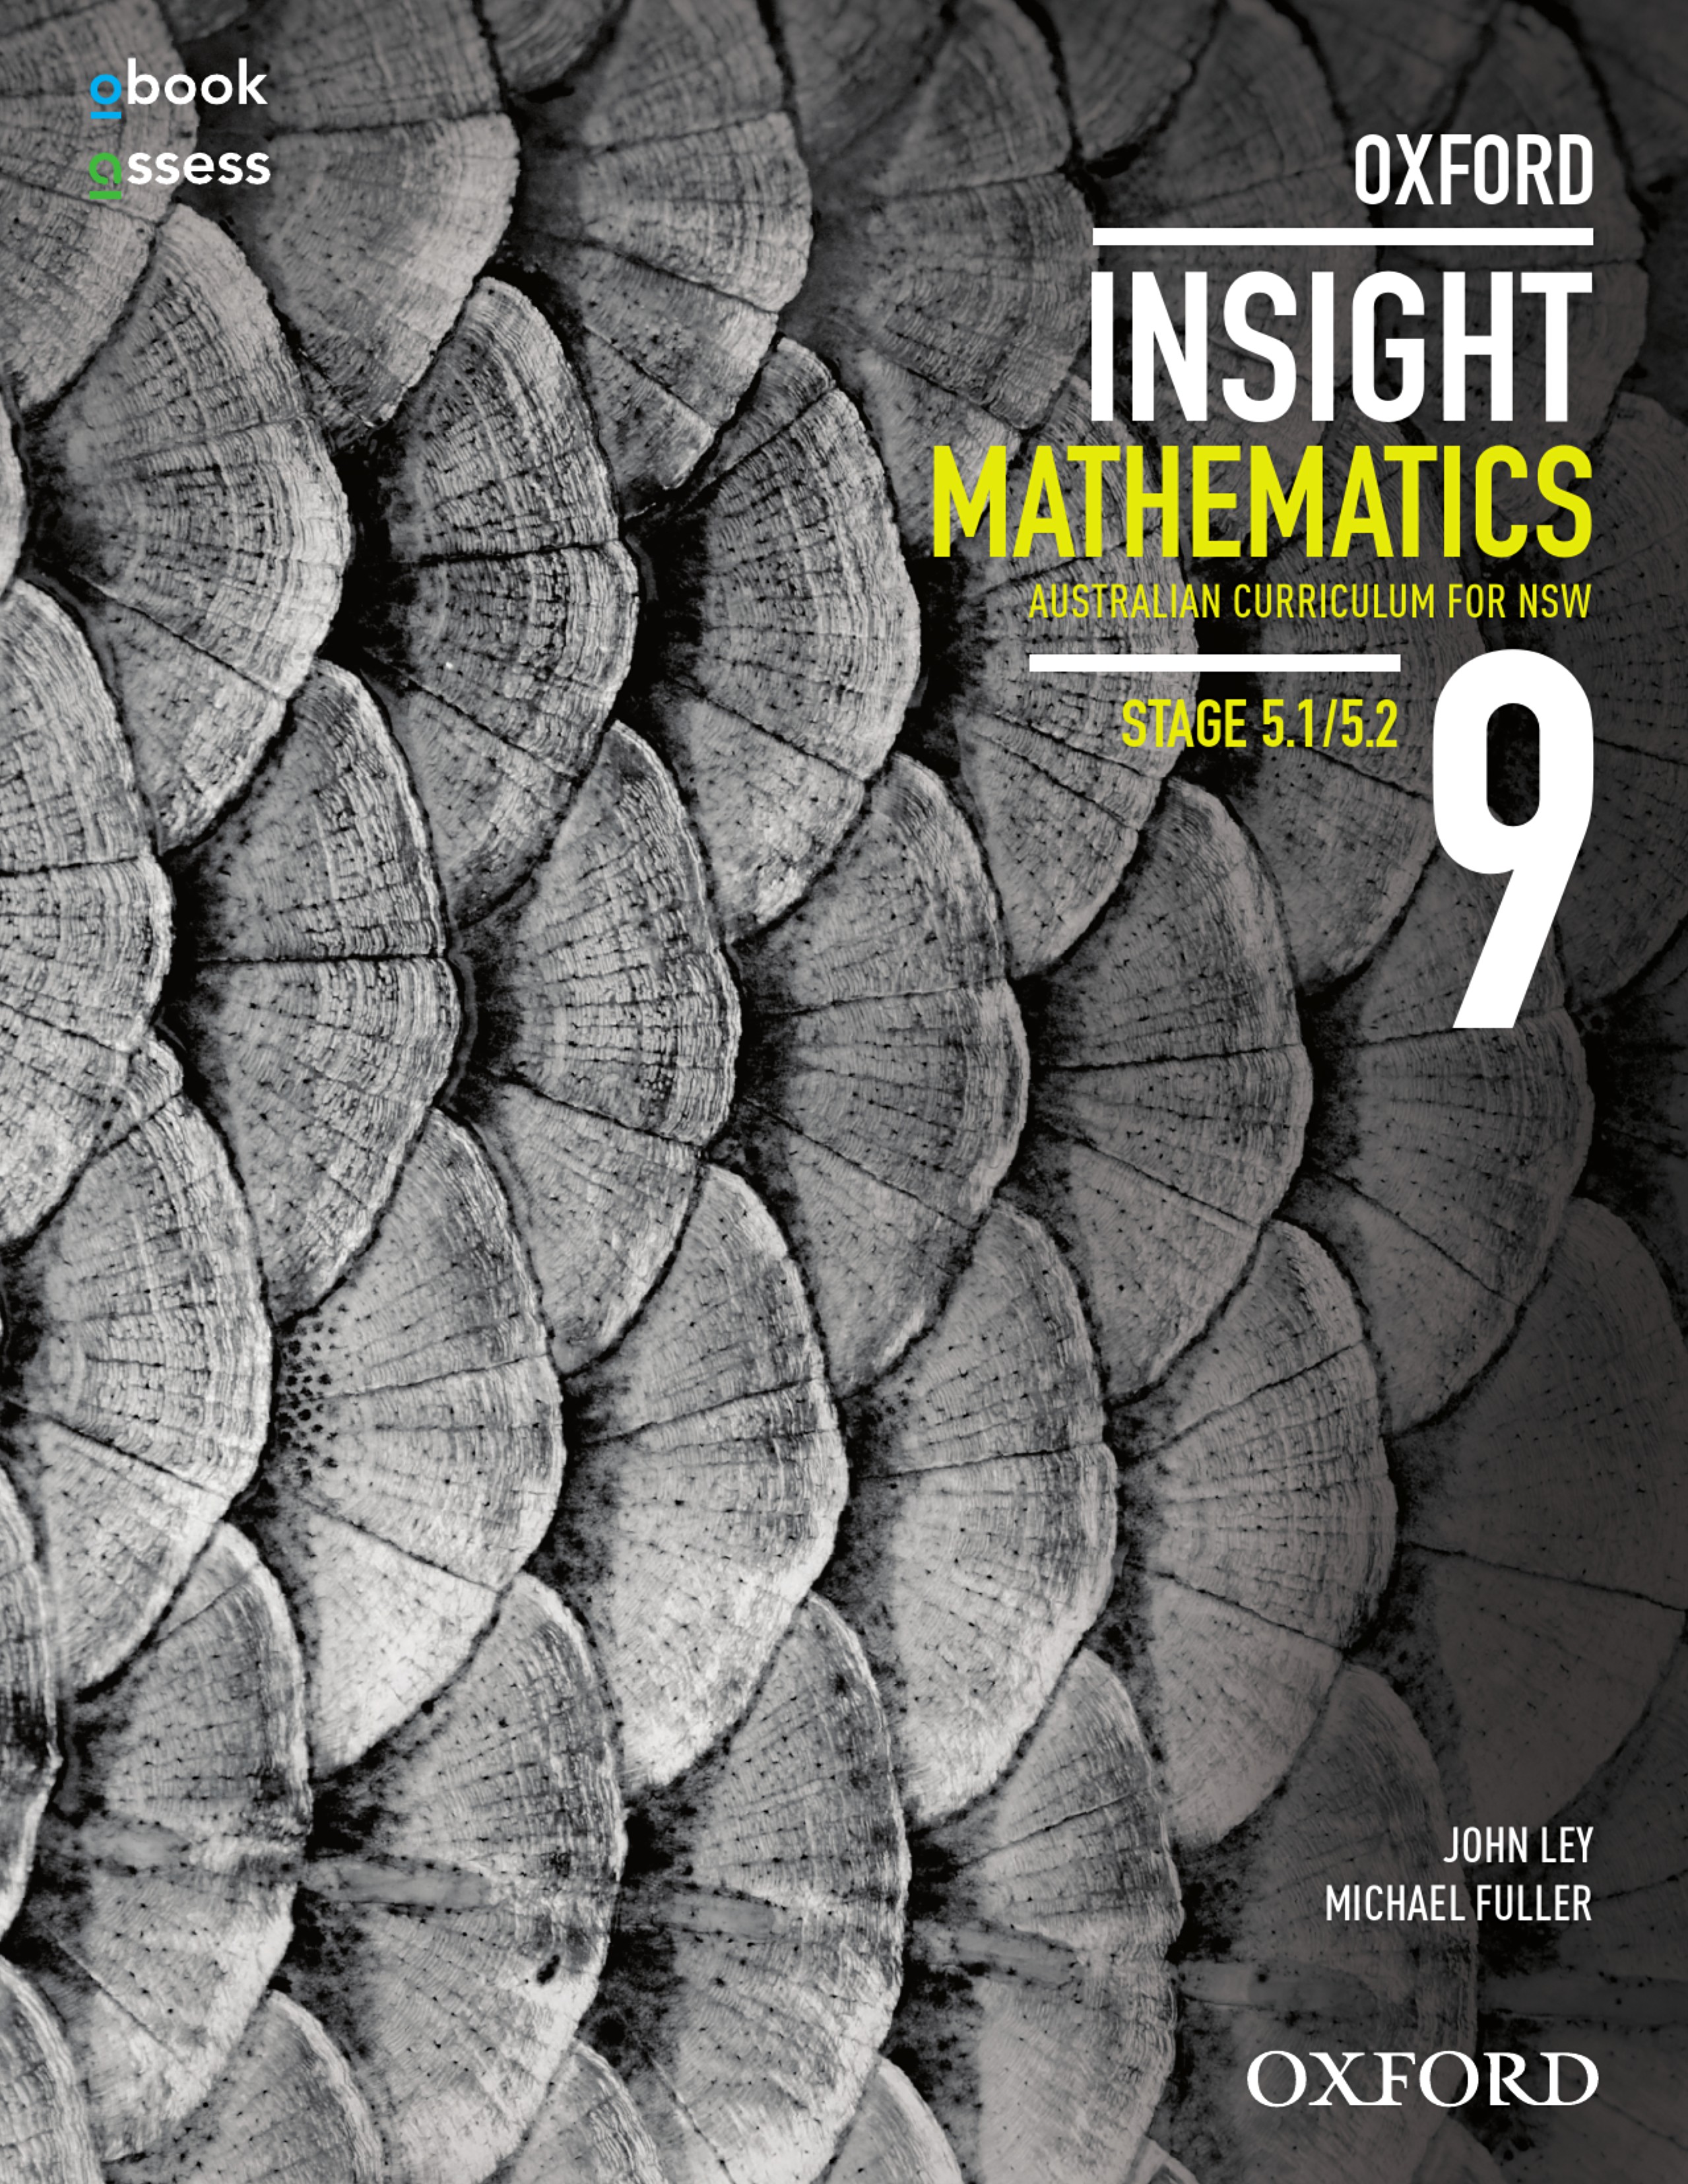 Oxford Insight Mathematics 9 Australian Curriculum for NSW Stages 5.1/5.2